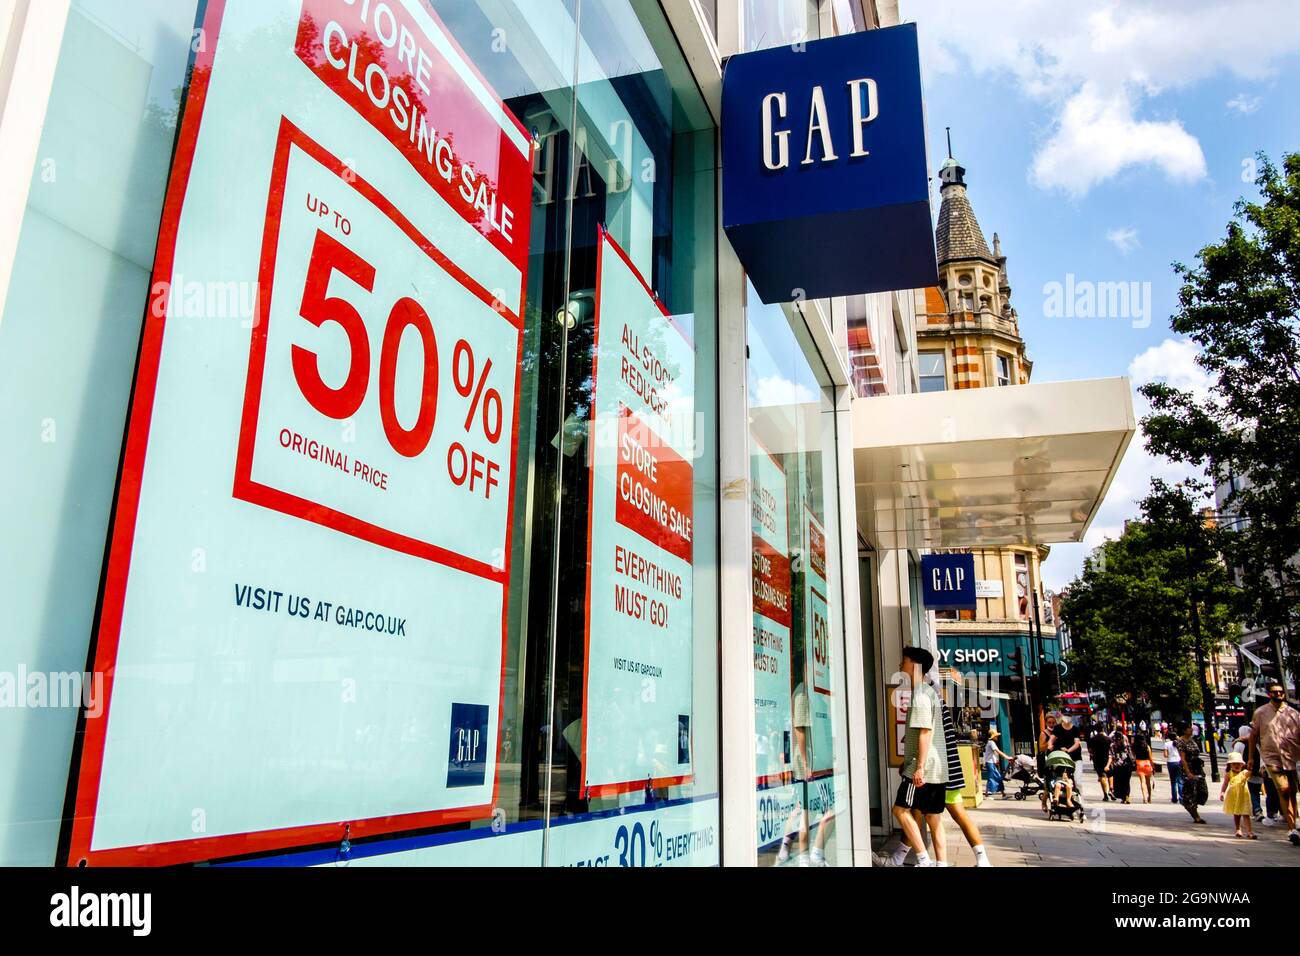 GAP flagship store in Oxford street, London, one of the clothing retailer's 81 stores in the UK that are scheduled for closure in 2021. Stock Photo